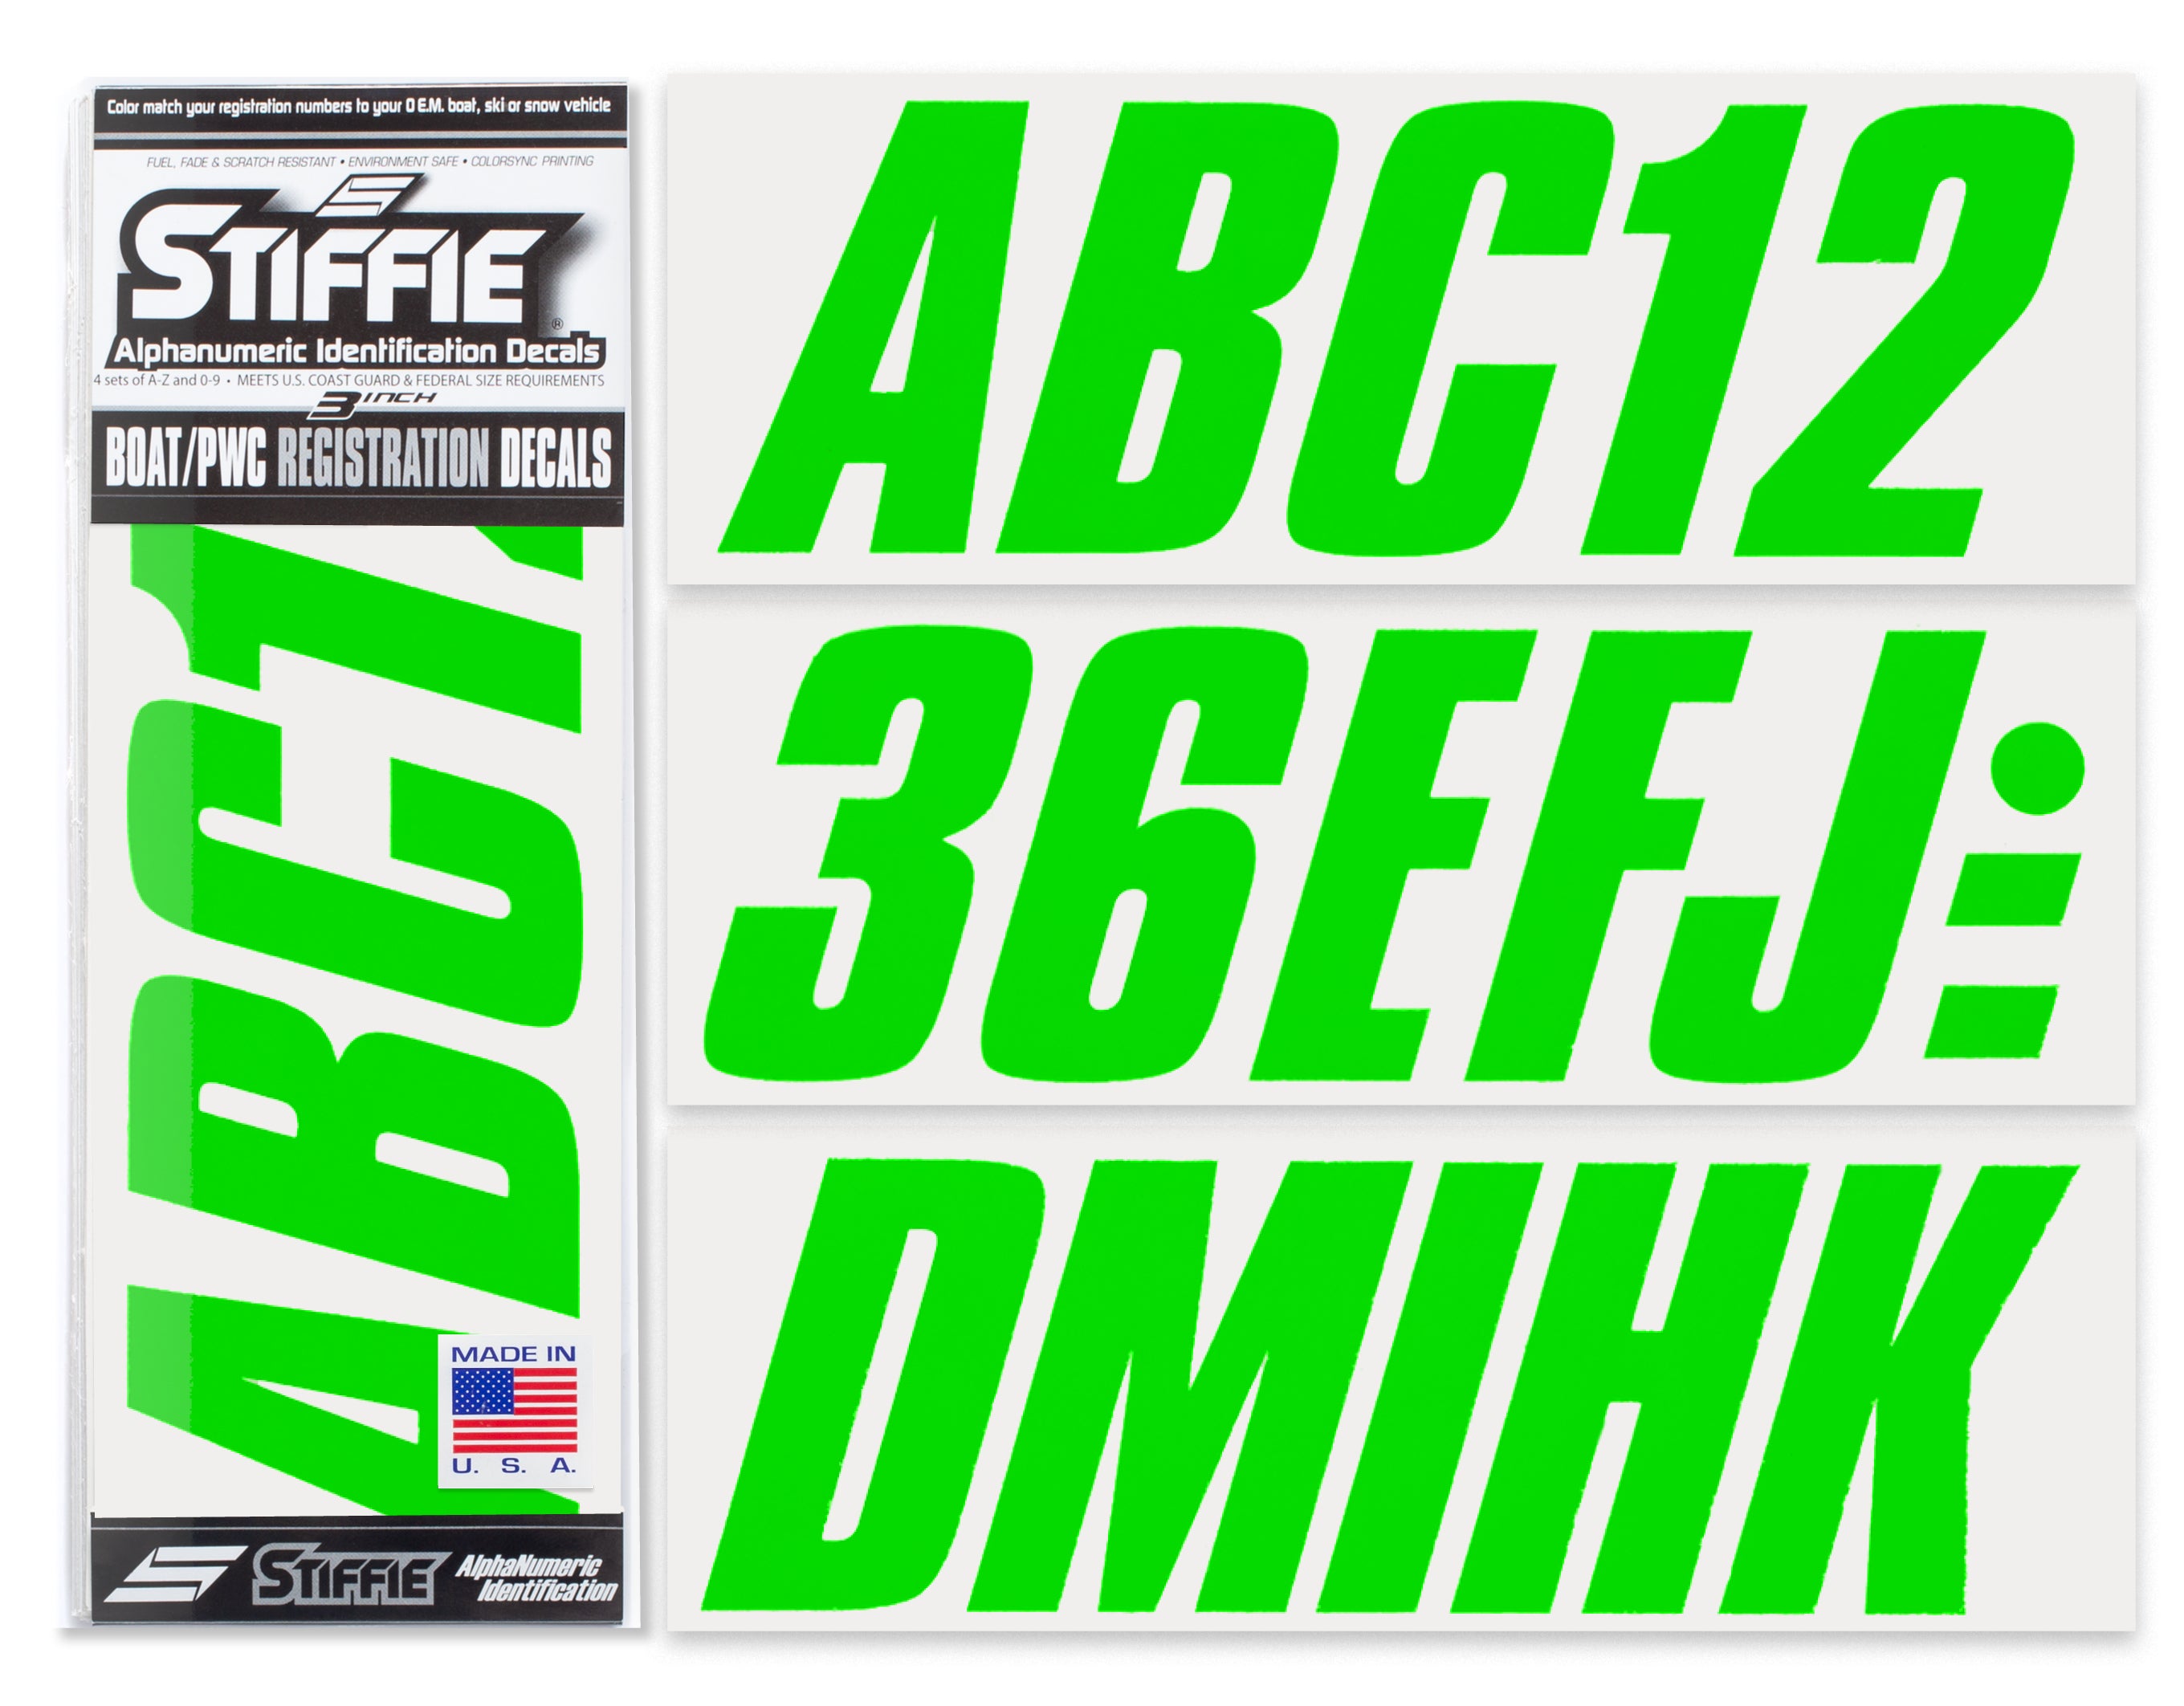 STIFFIE Shift Electric Green 3" ID Kit Alpha-Numeric Registration Identification Numbers Stickers Decals for Boats & Personal Watercraft